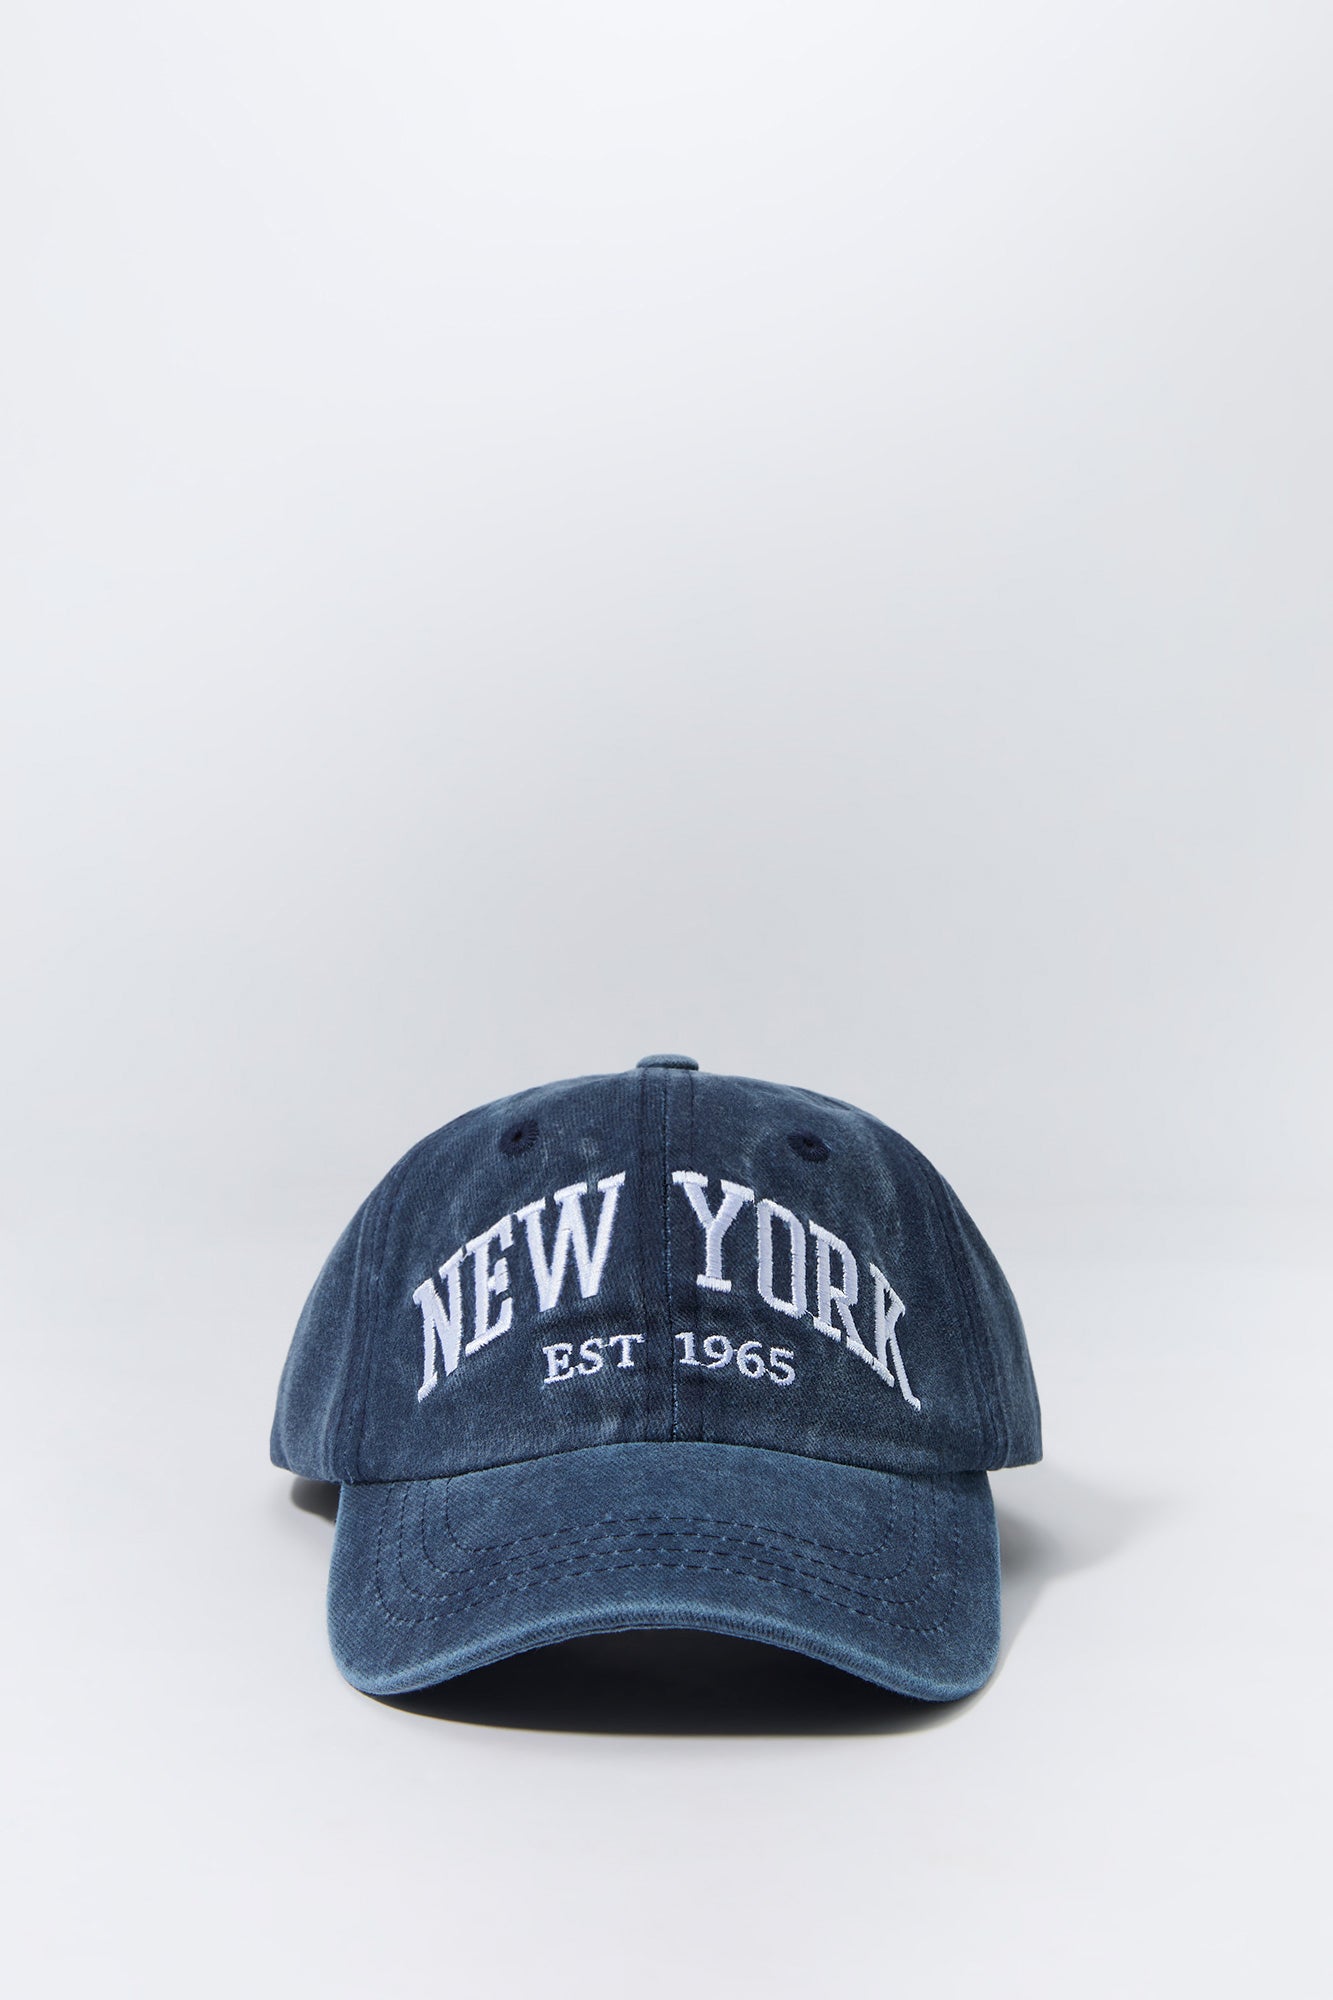 Boys New York Embroidered Washed Baseball Hat